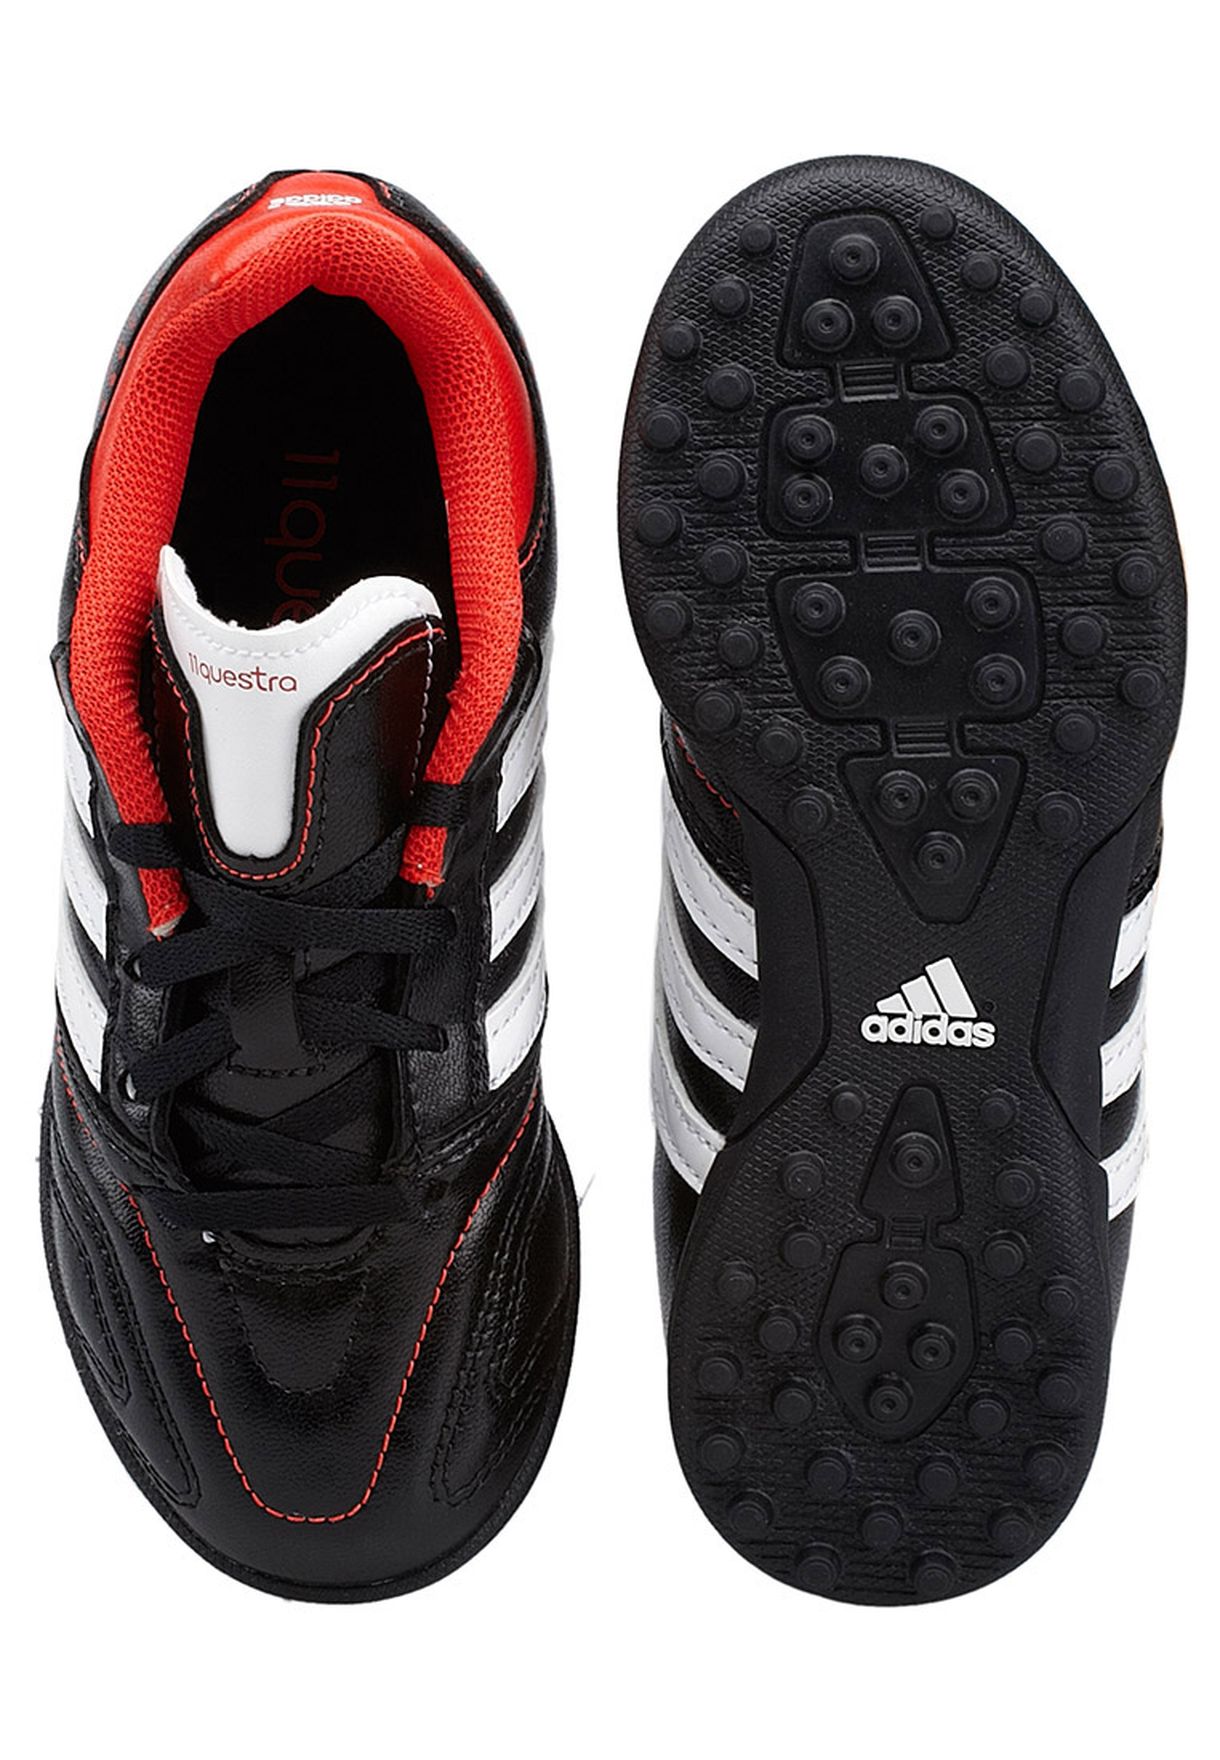 adidas questra trainers